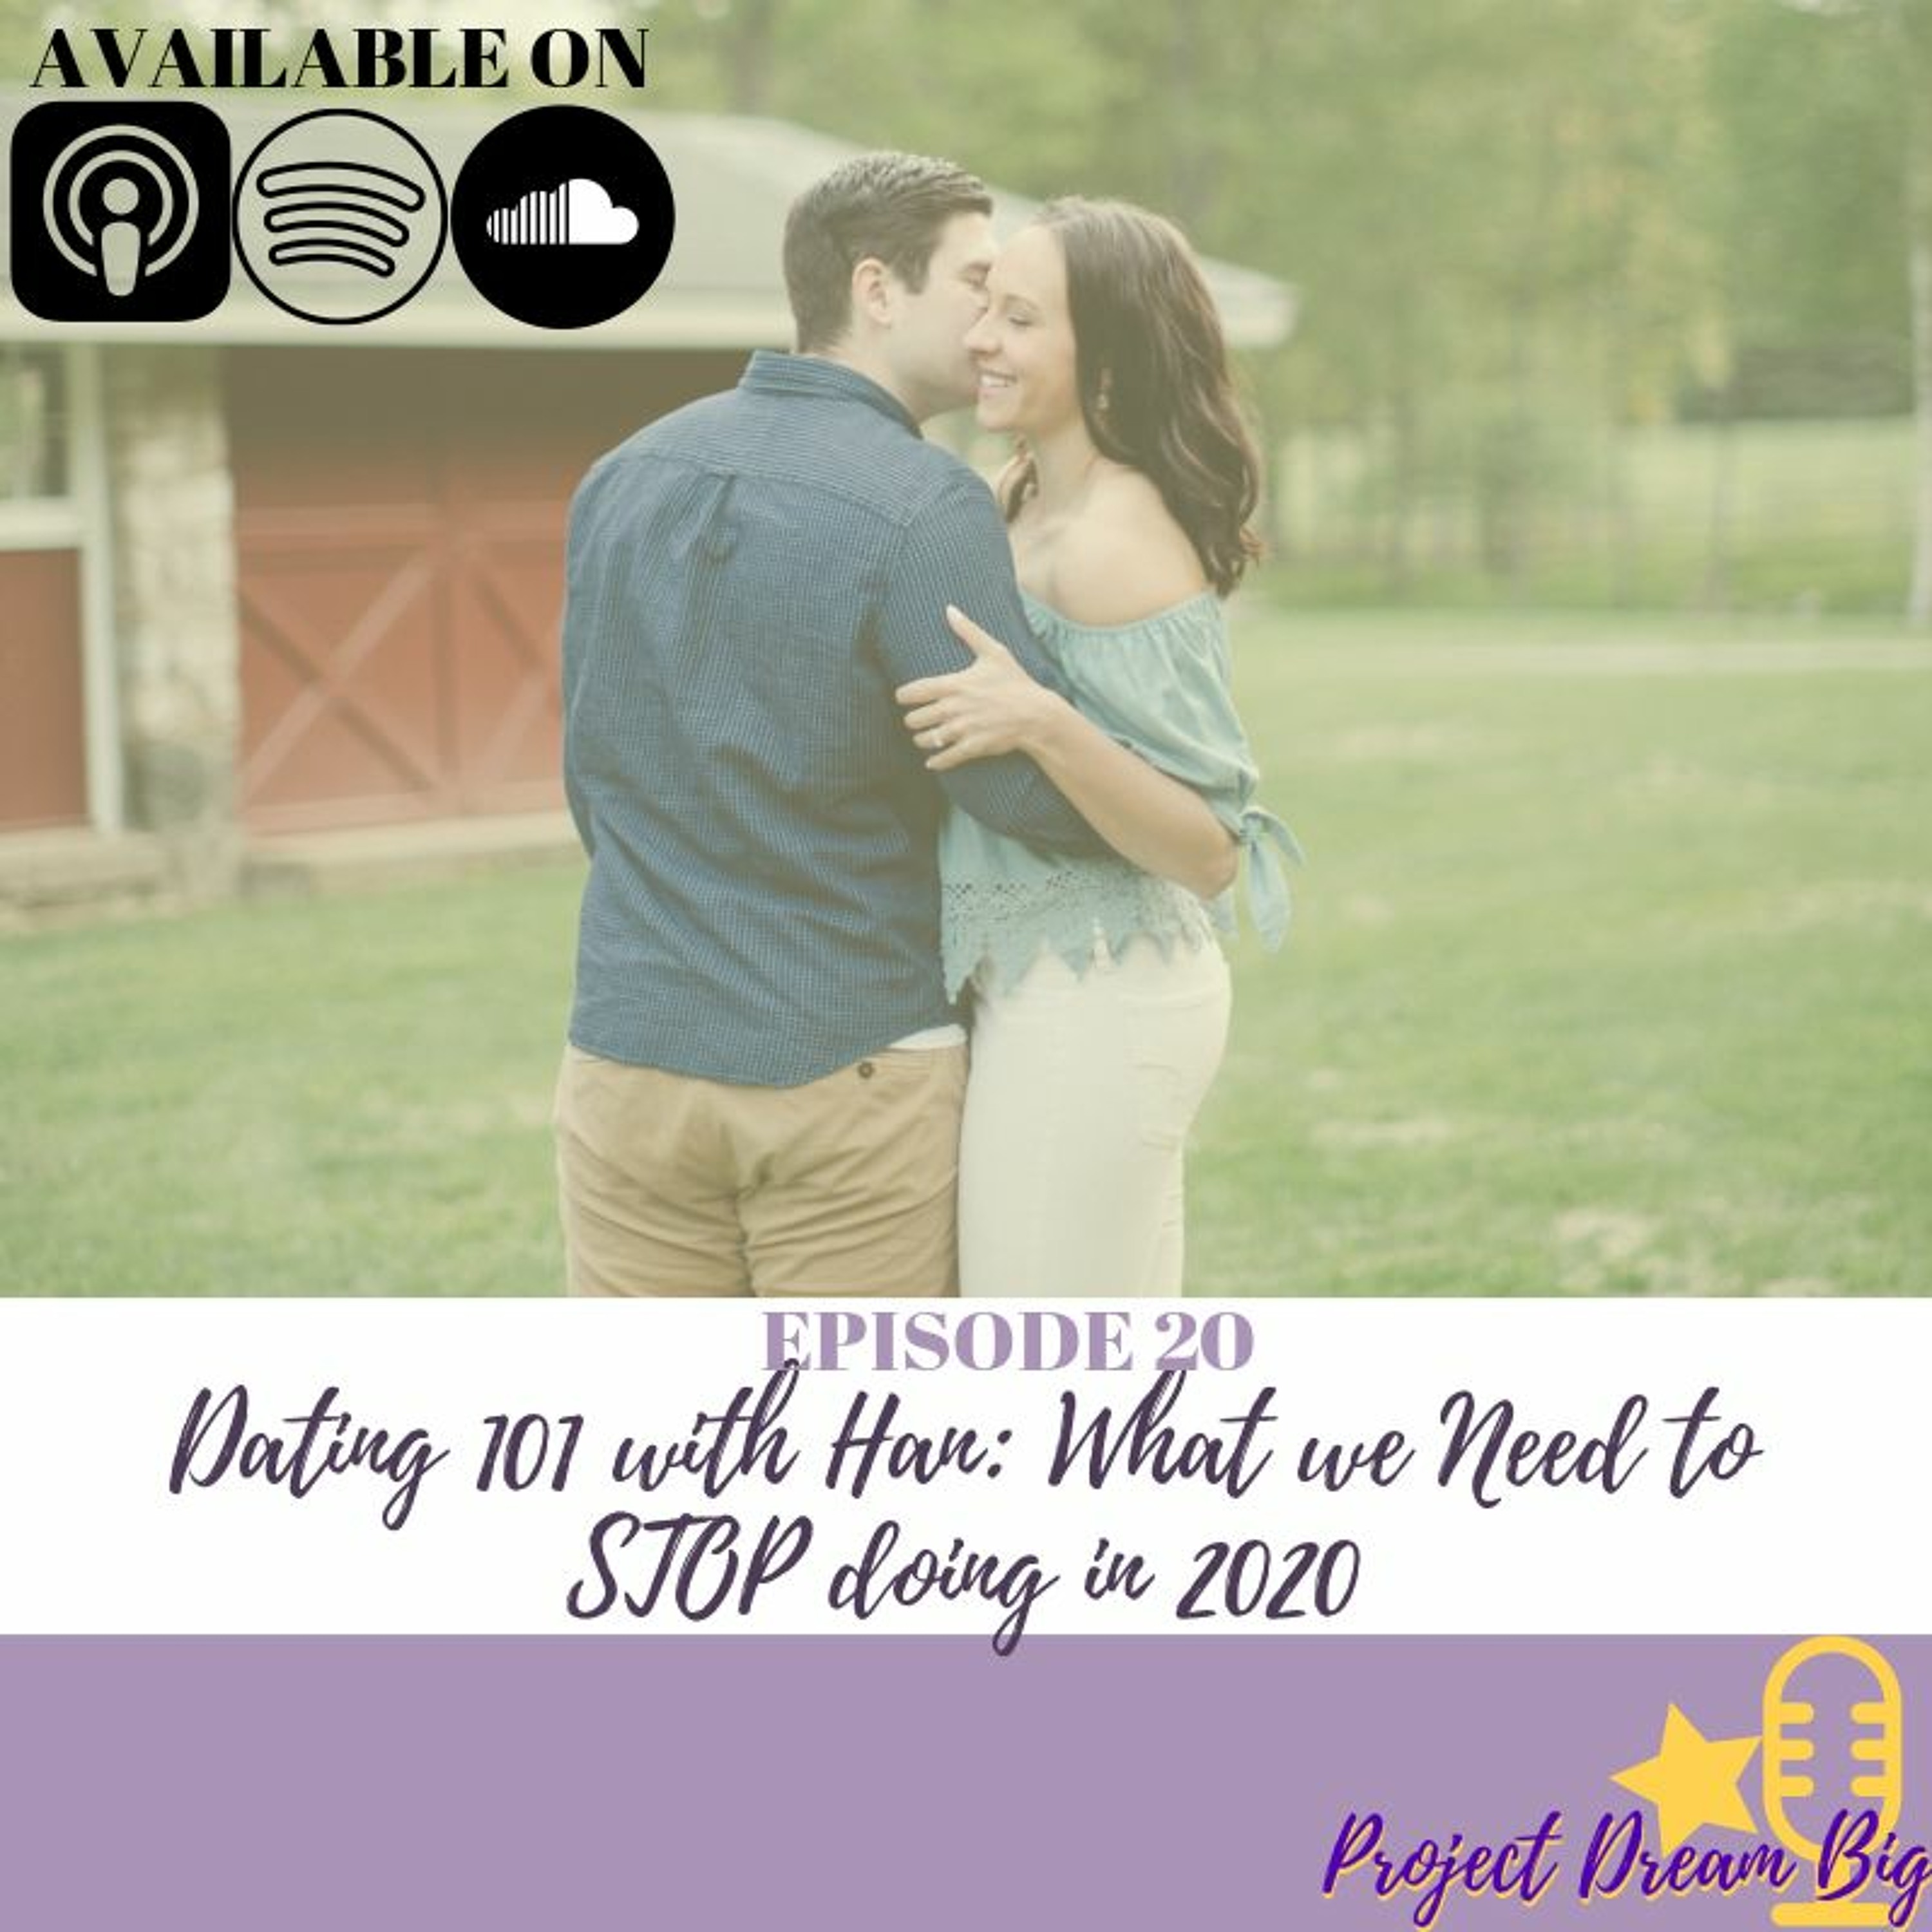 20.Dating 101 with Han: What we Need to STOP doing in 2020